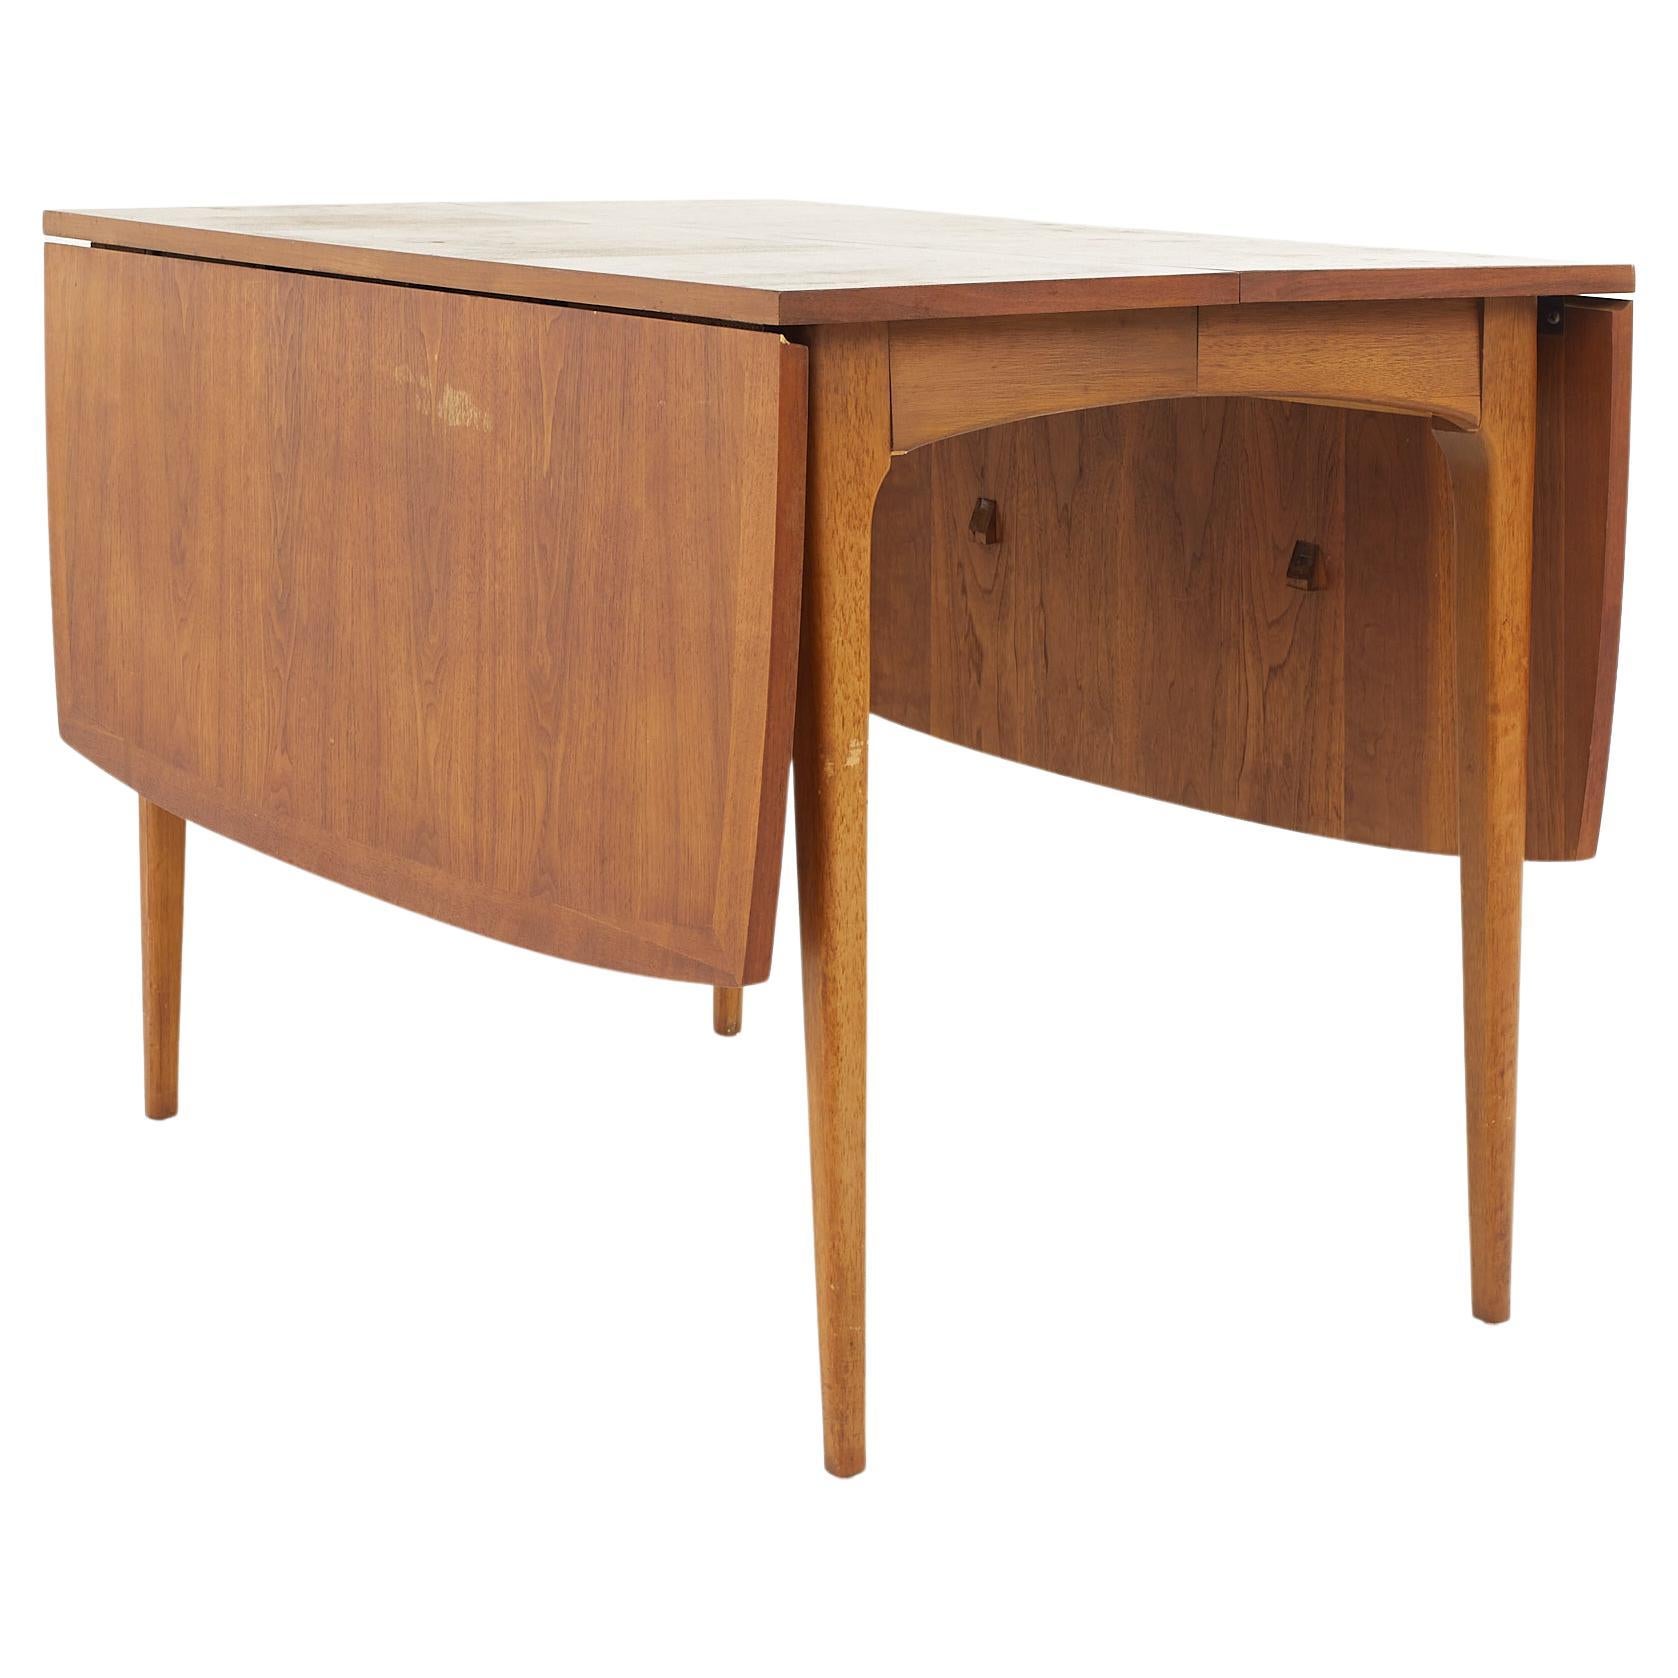 Lane Rhythm Mid-Century Walnut Drop Leaf Expanding Dining Table with 2 Leaves